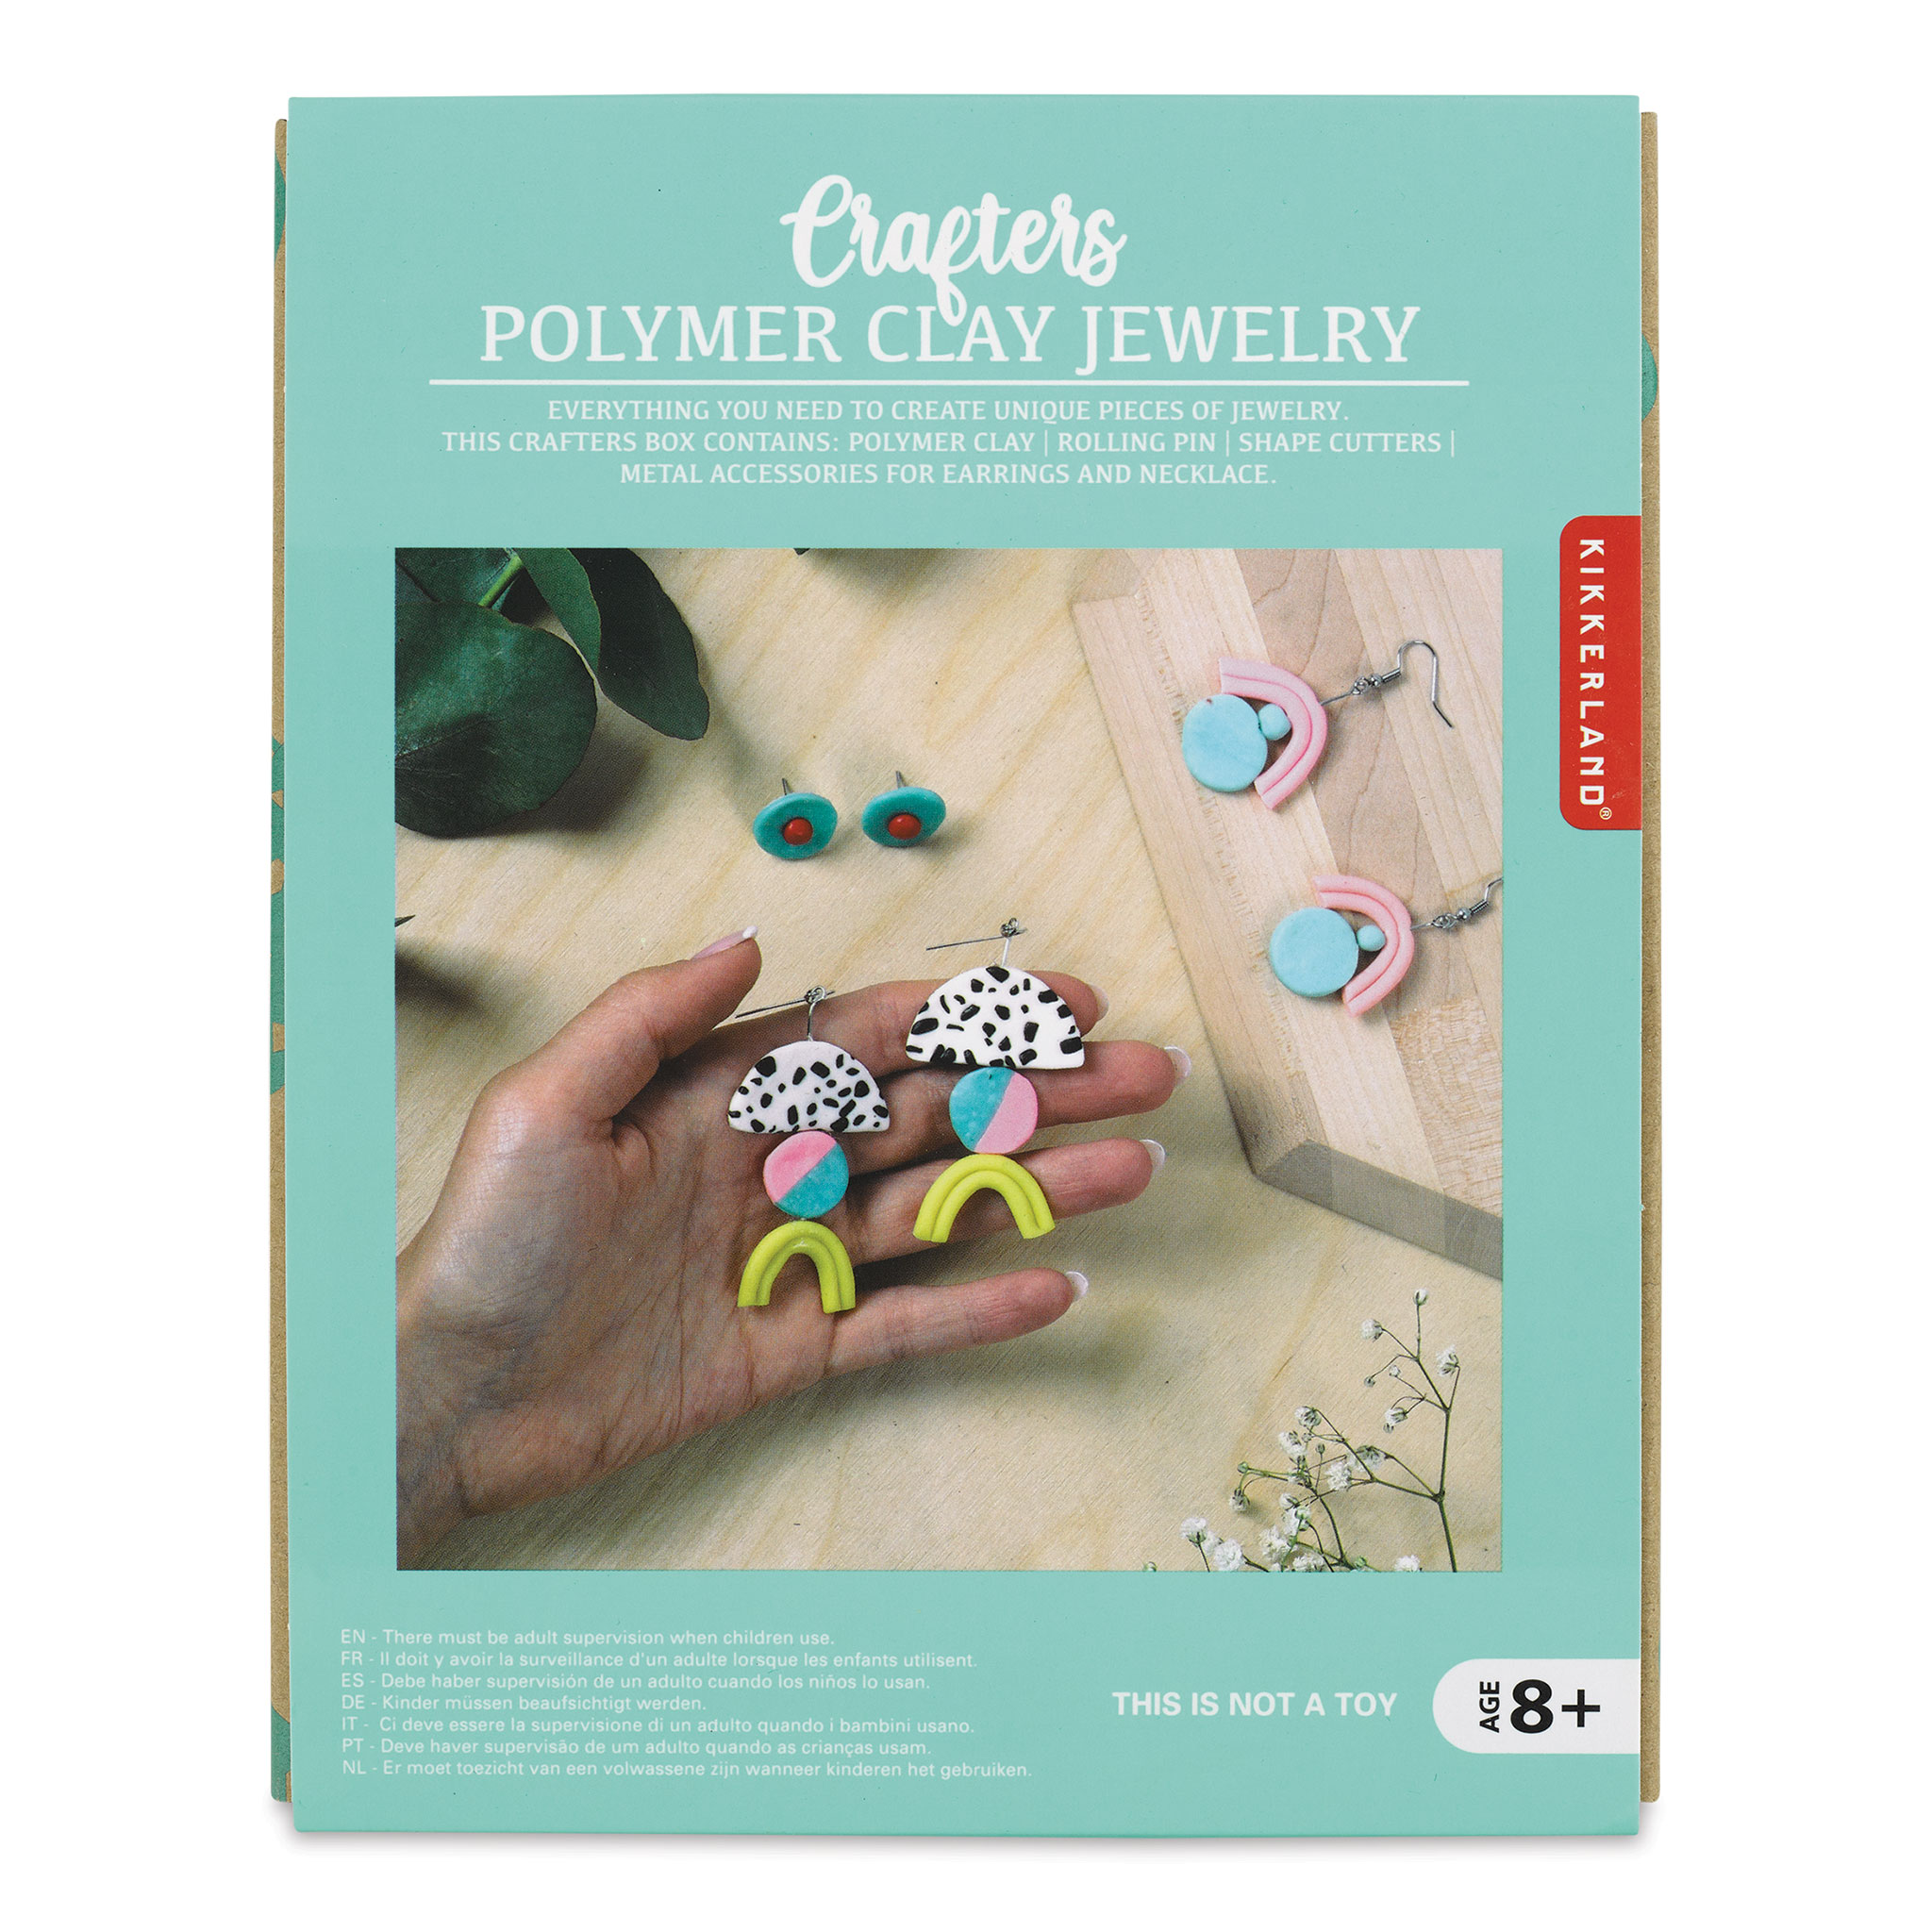 Live - 3 in 1 Polymer Clay Jewelry Making Kits for Adults and Kids